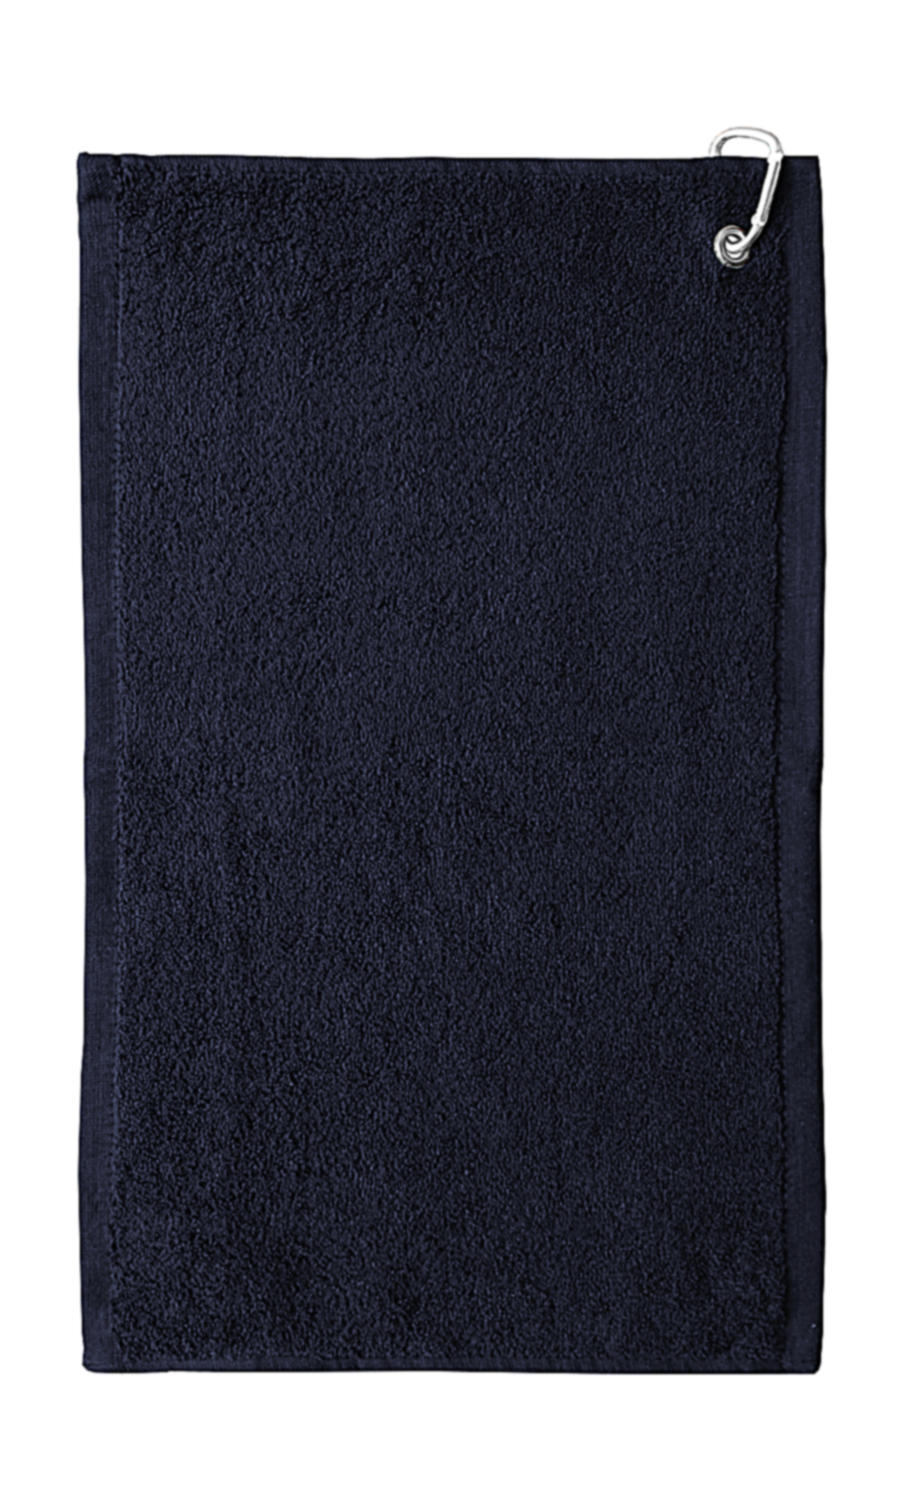  Thames Golf Towel 30x50 cm in Farbe Navy